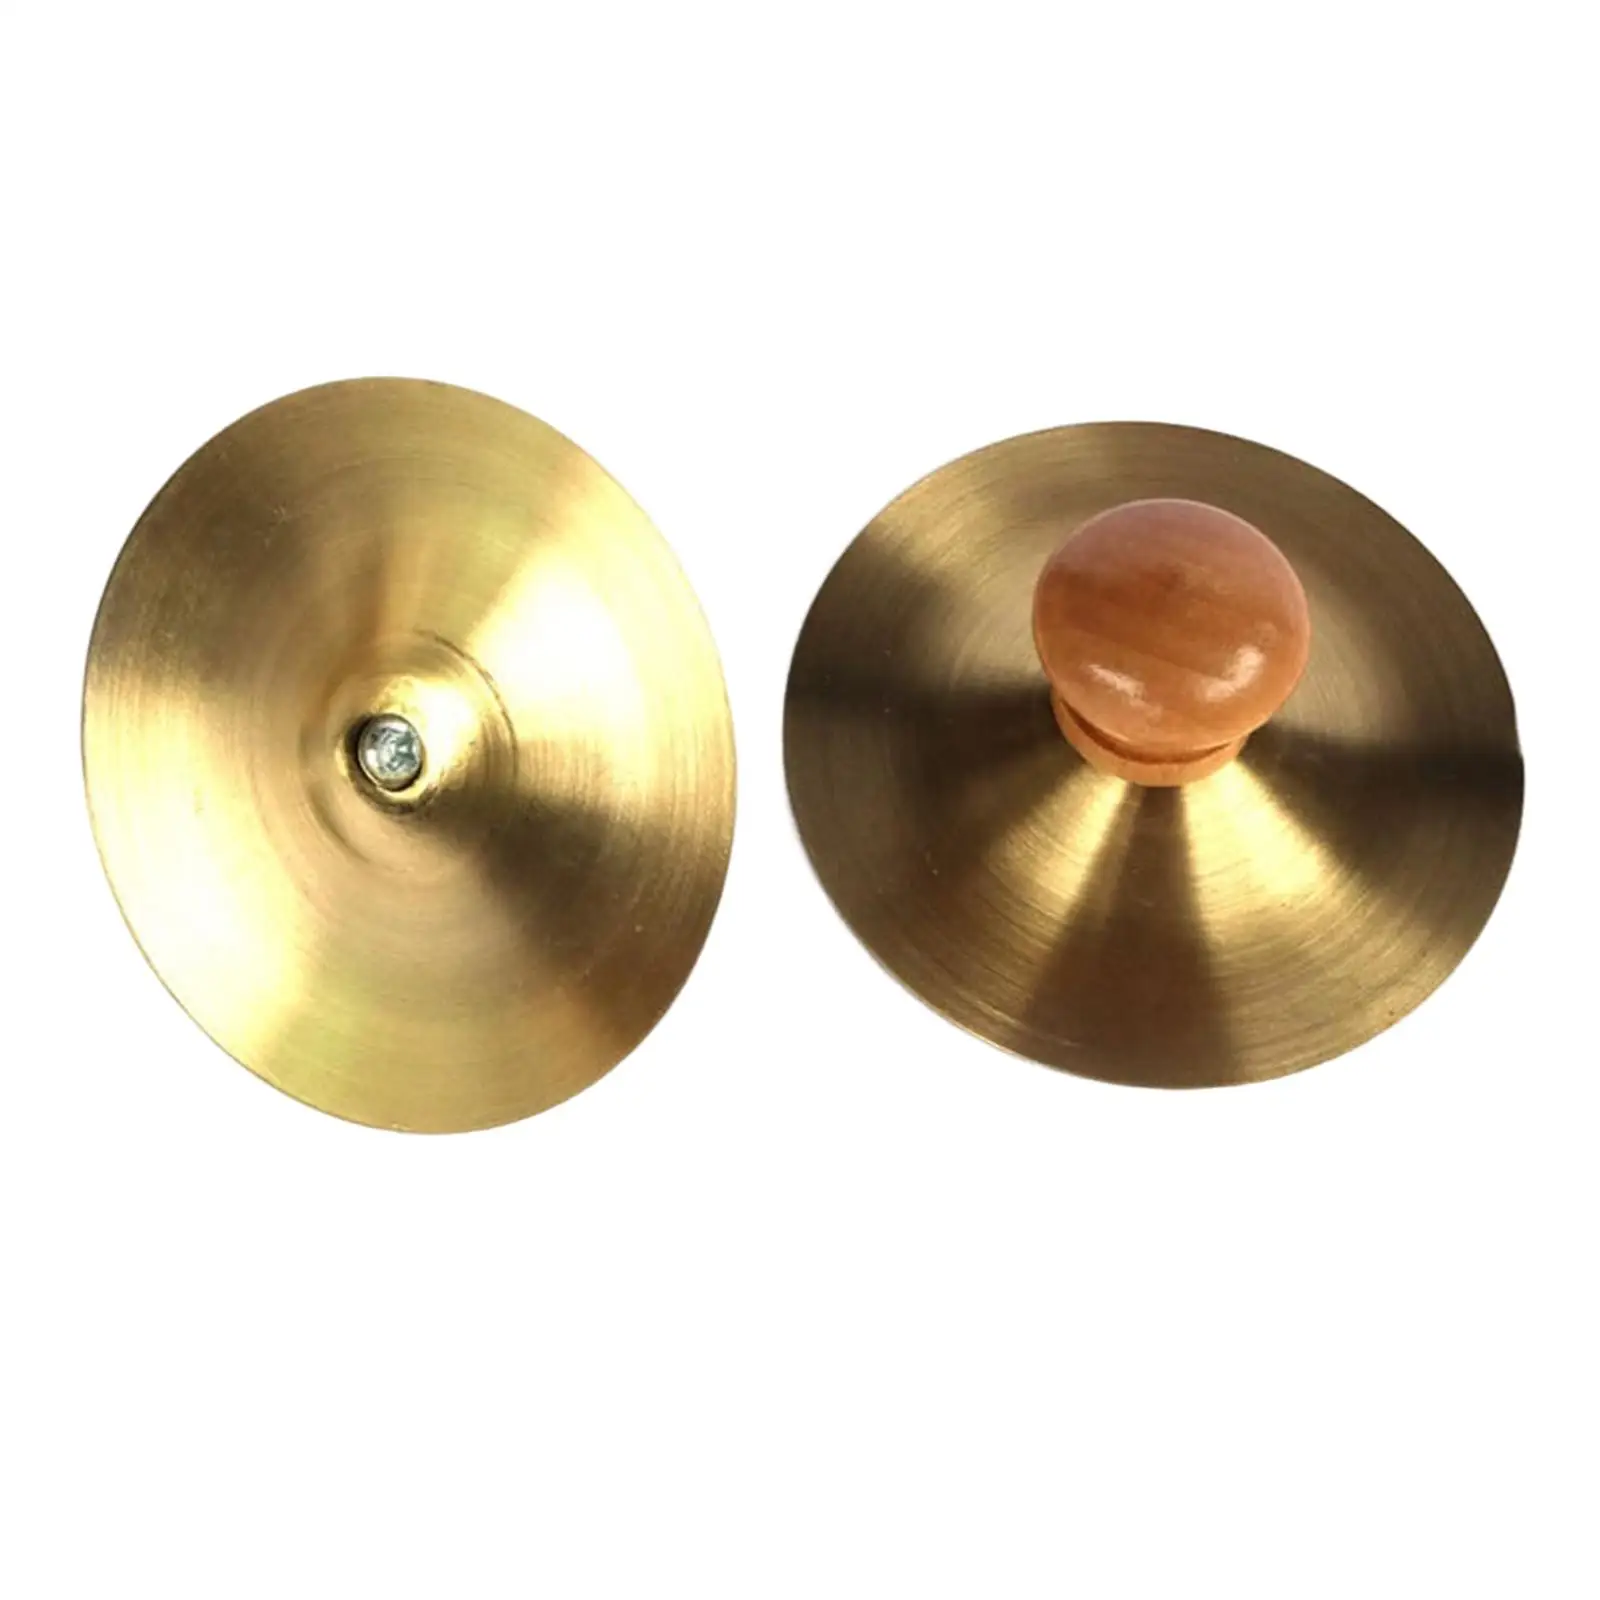 1 Pair Hand Percussion Finger Cymbals Kids Toy Hand Eye Coordination Musical Instrument Copper Hand Cymbals for Children Gifts